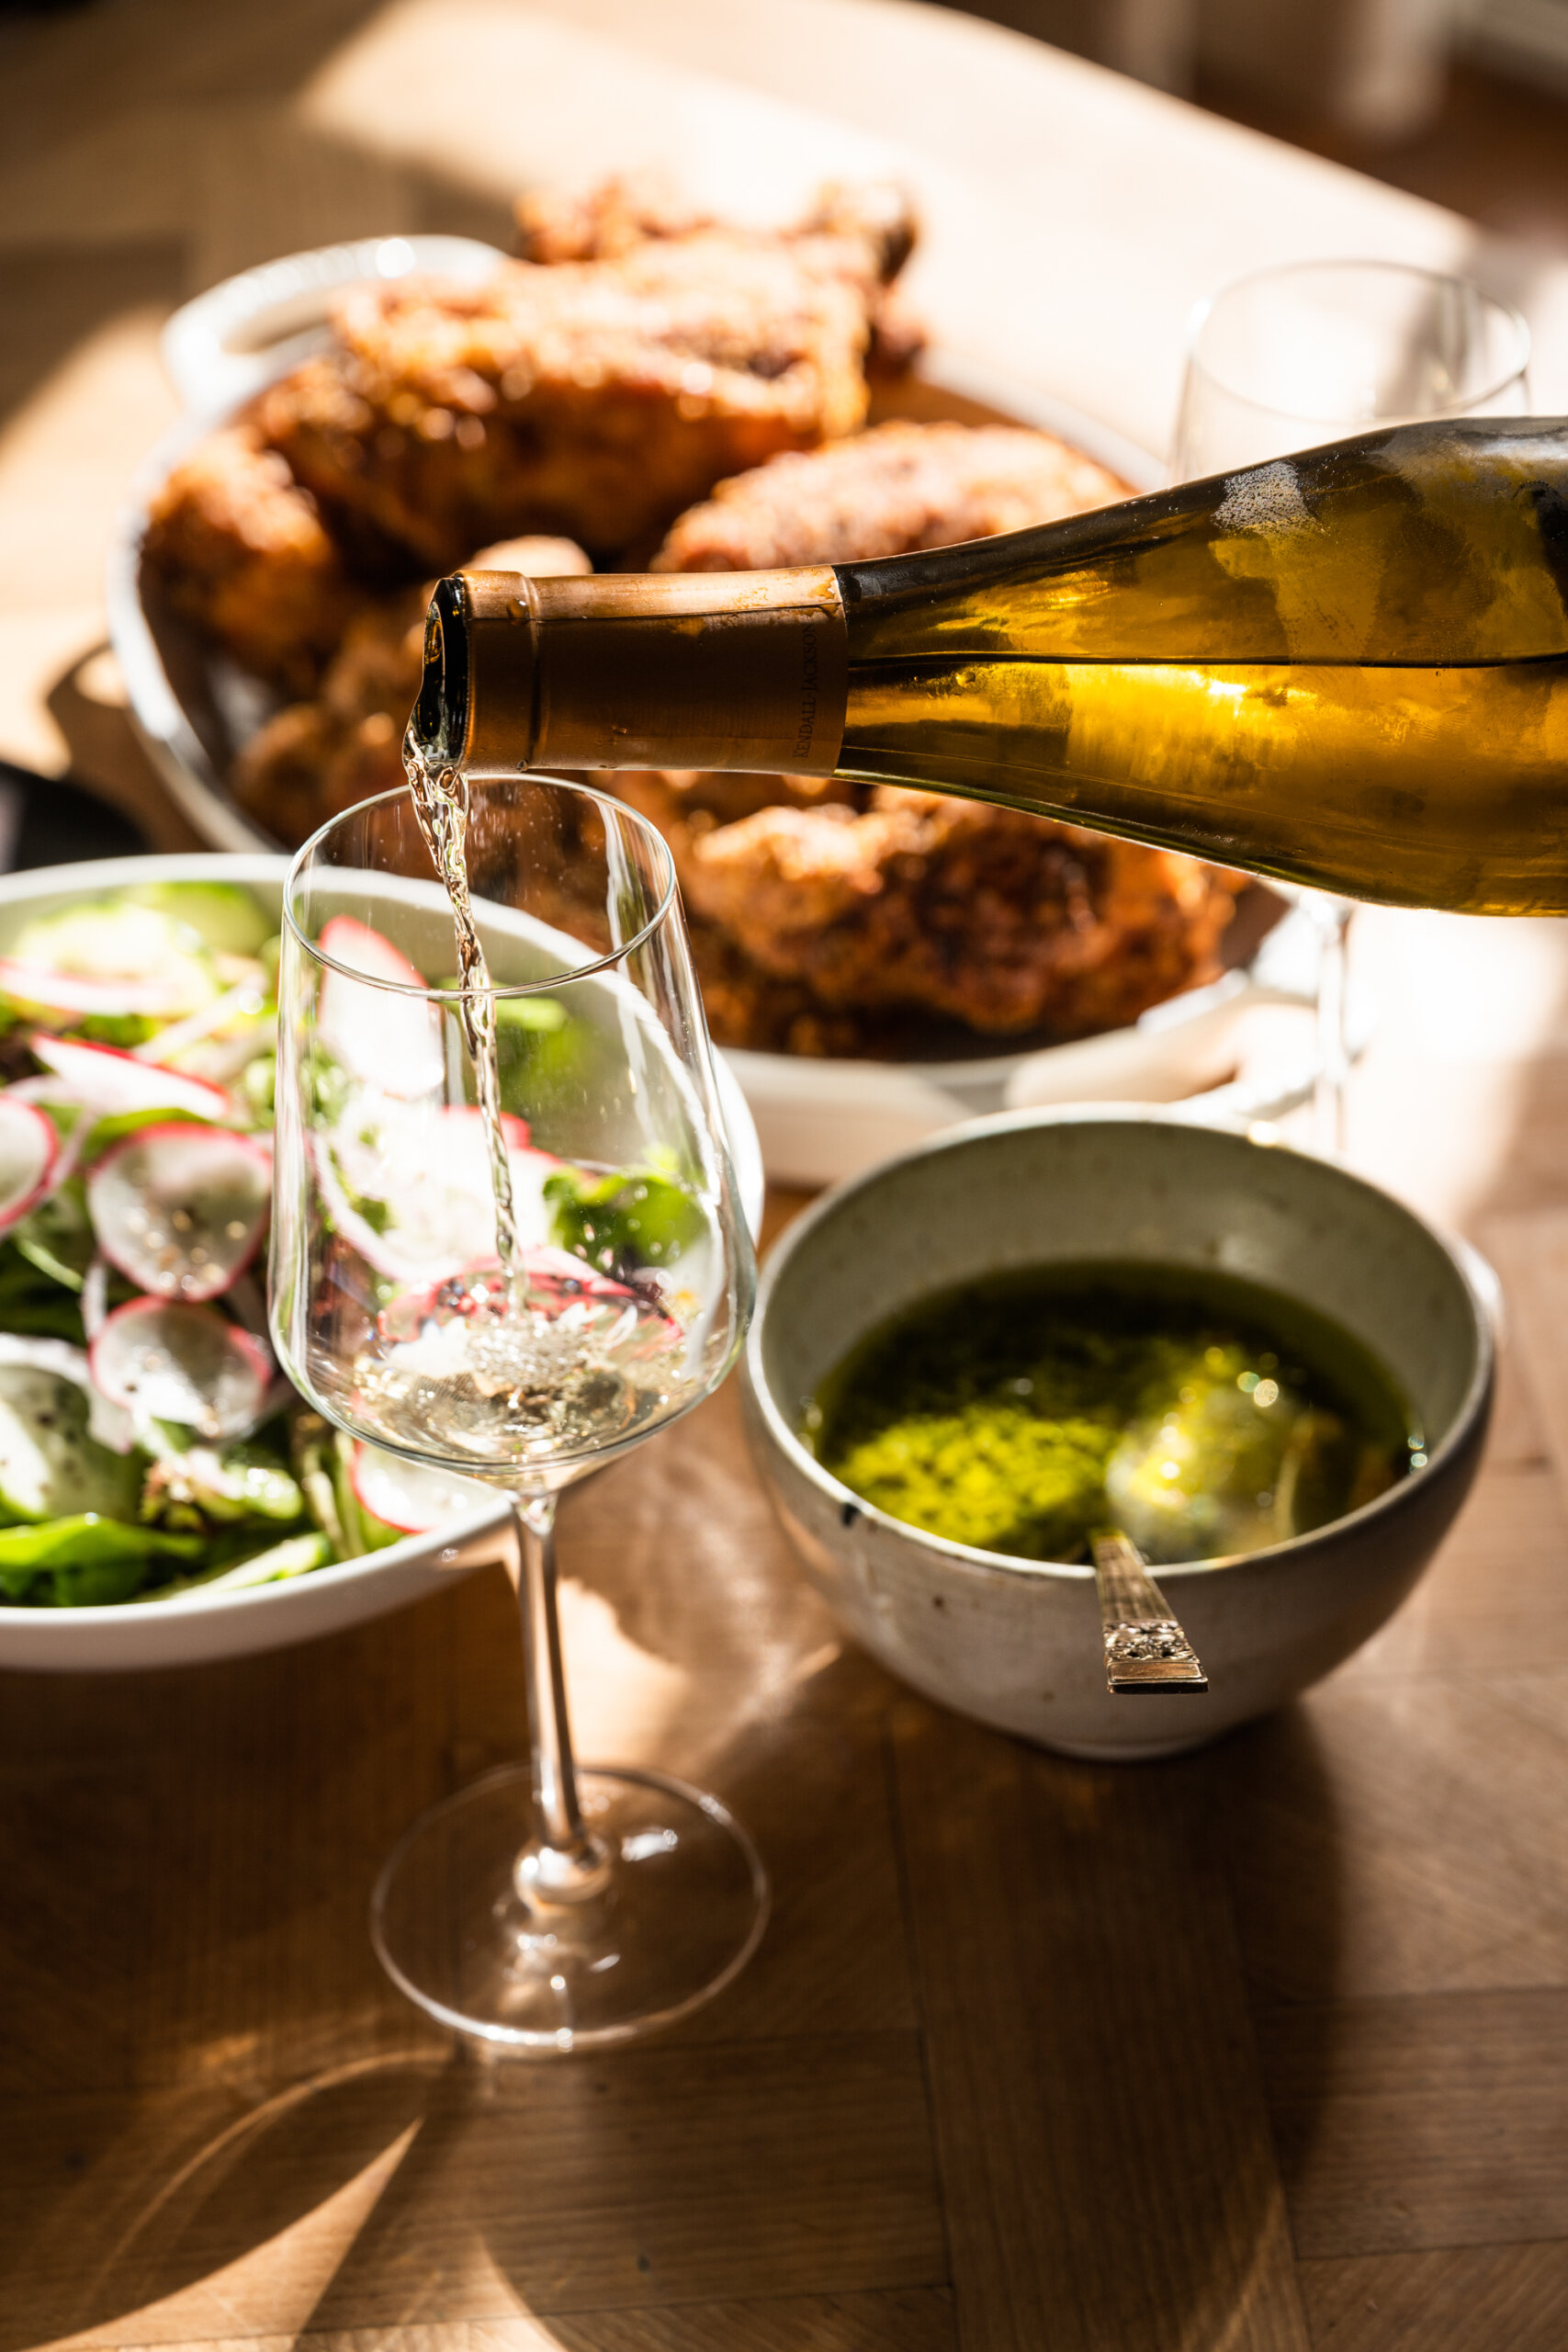 A glass of California chardonnay is poured for pairing with fried chicken